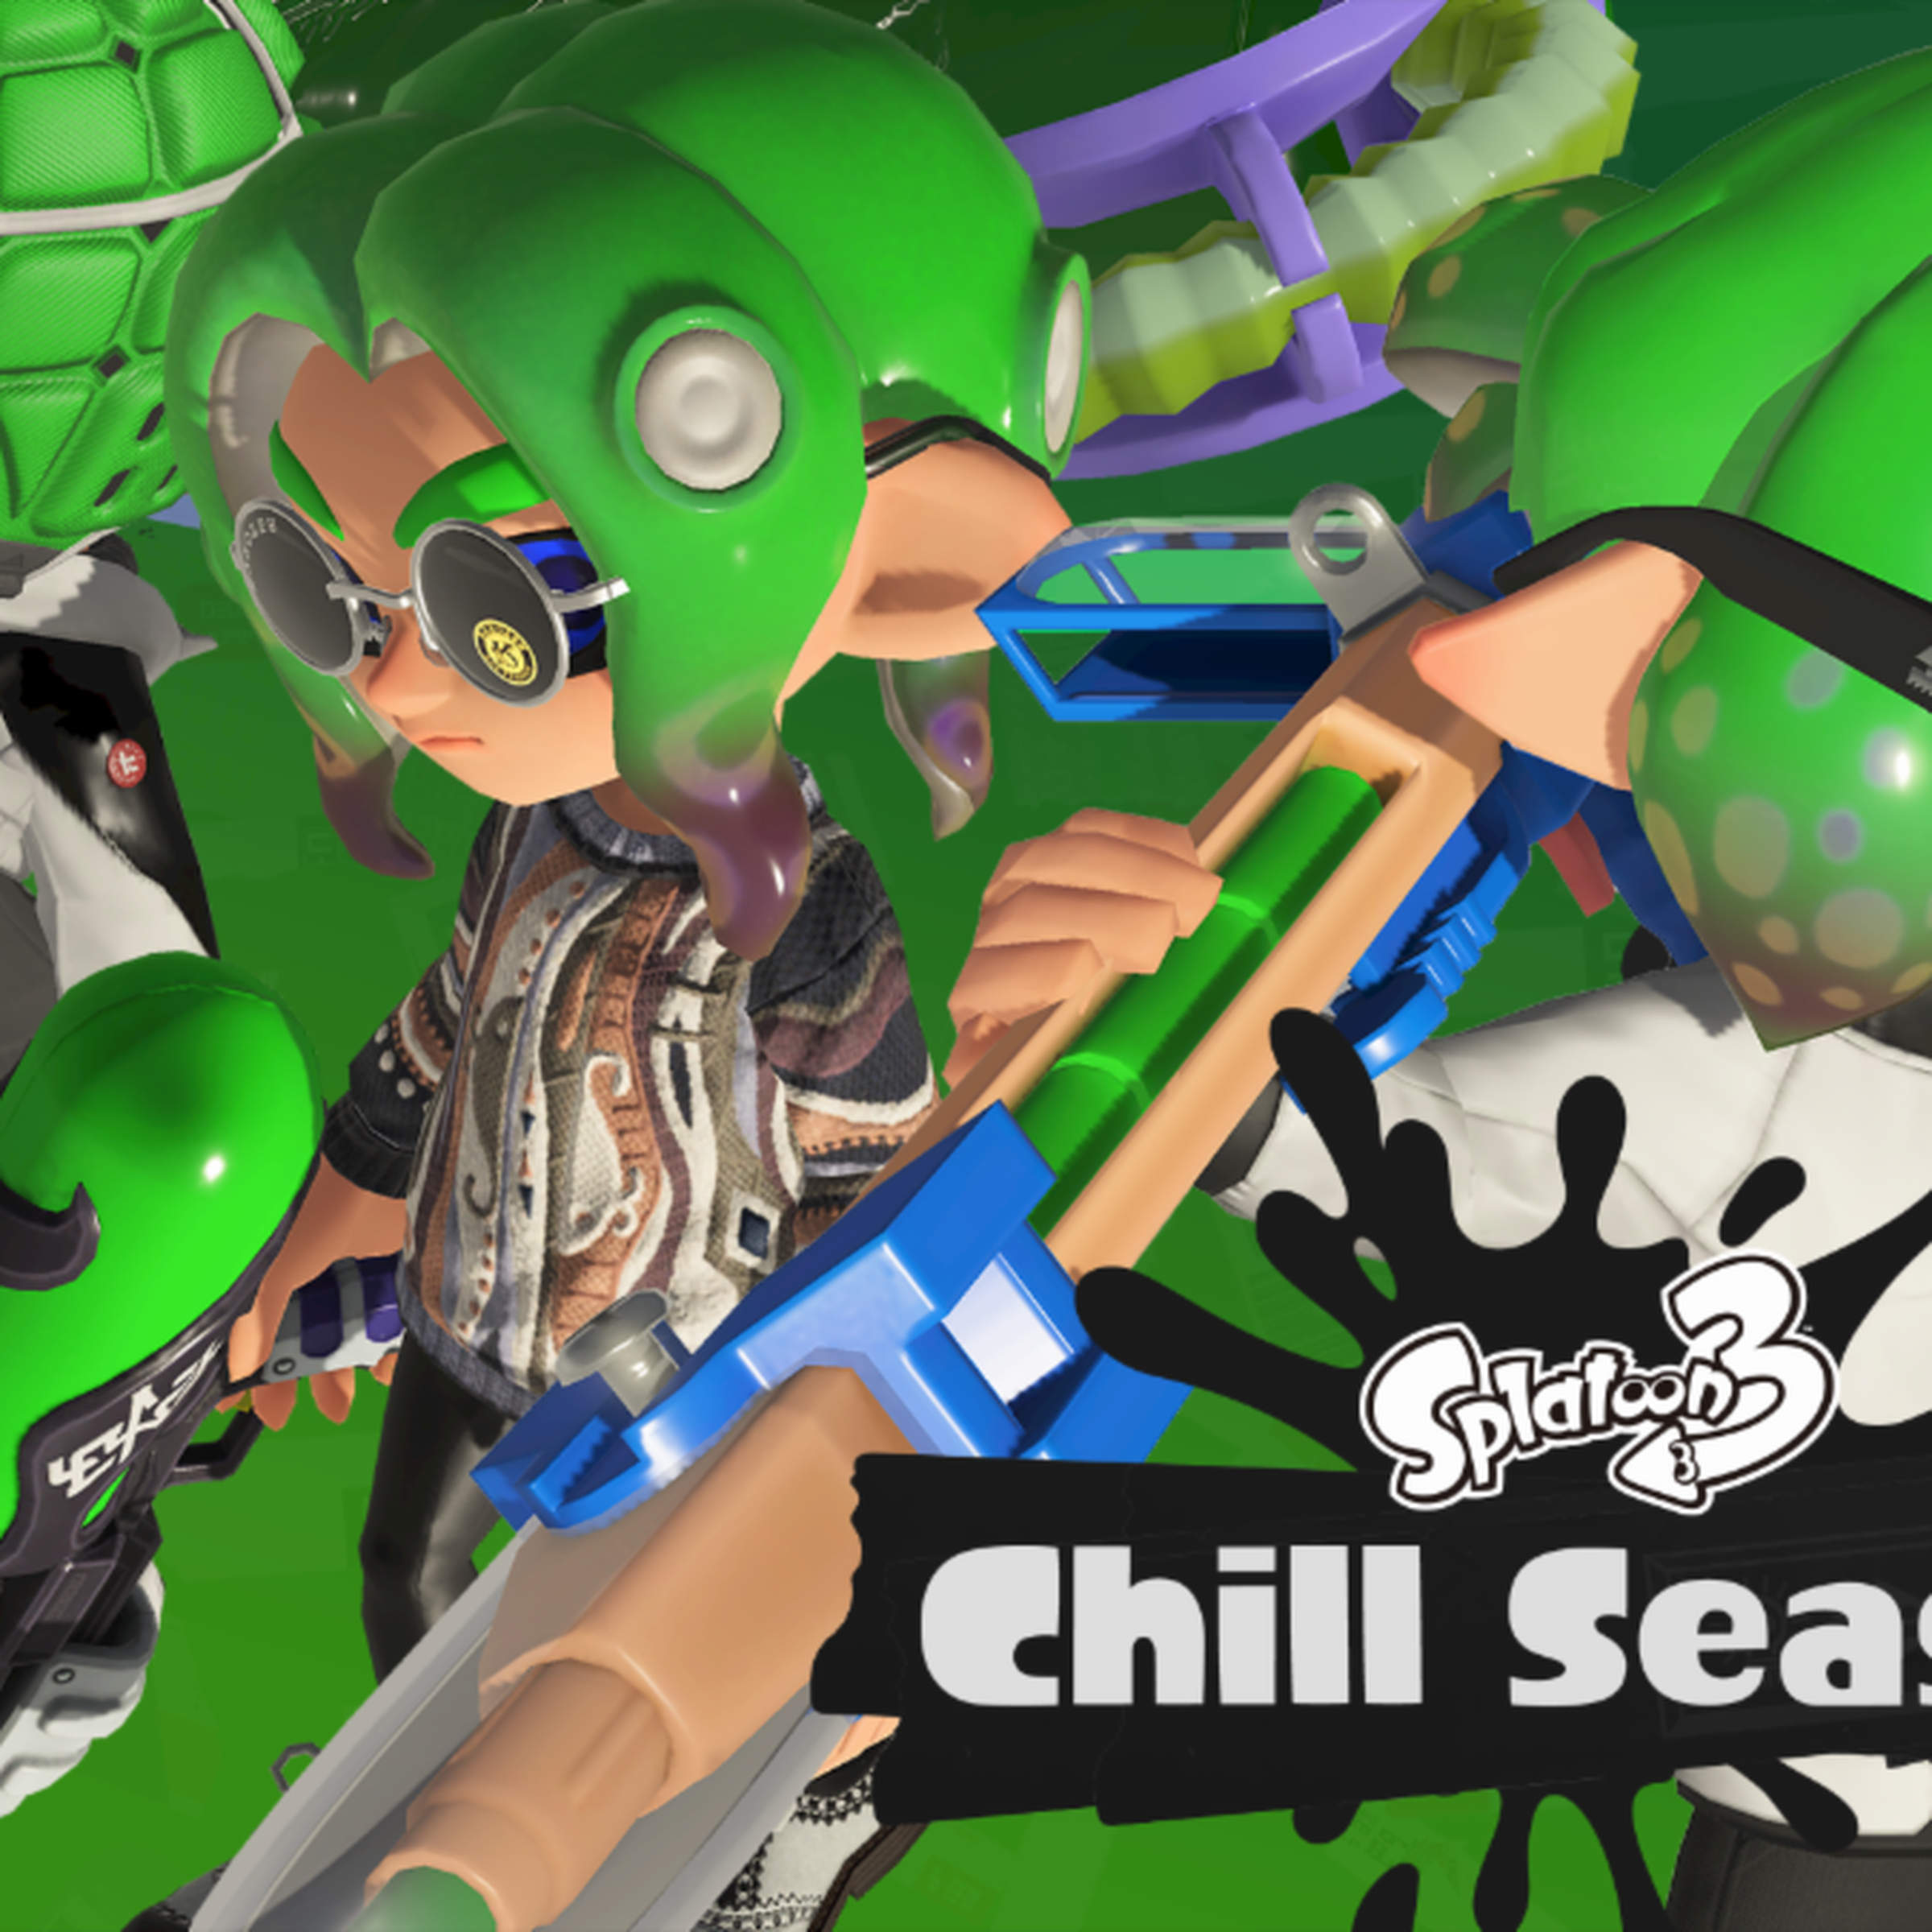 Graphic depicting three green octolings from Splatoon 3 over a background splattered with bright green paint and the words “Chill Season 2022” in the bottom-right corner